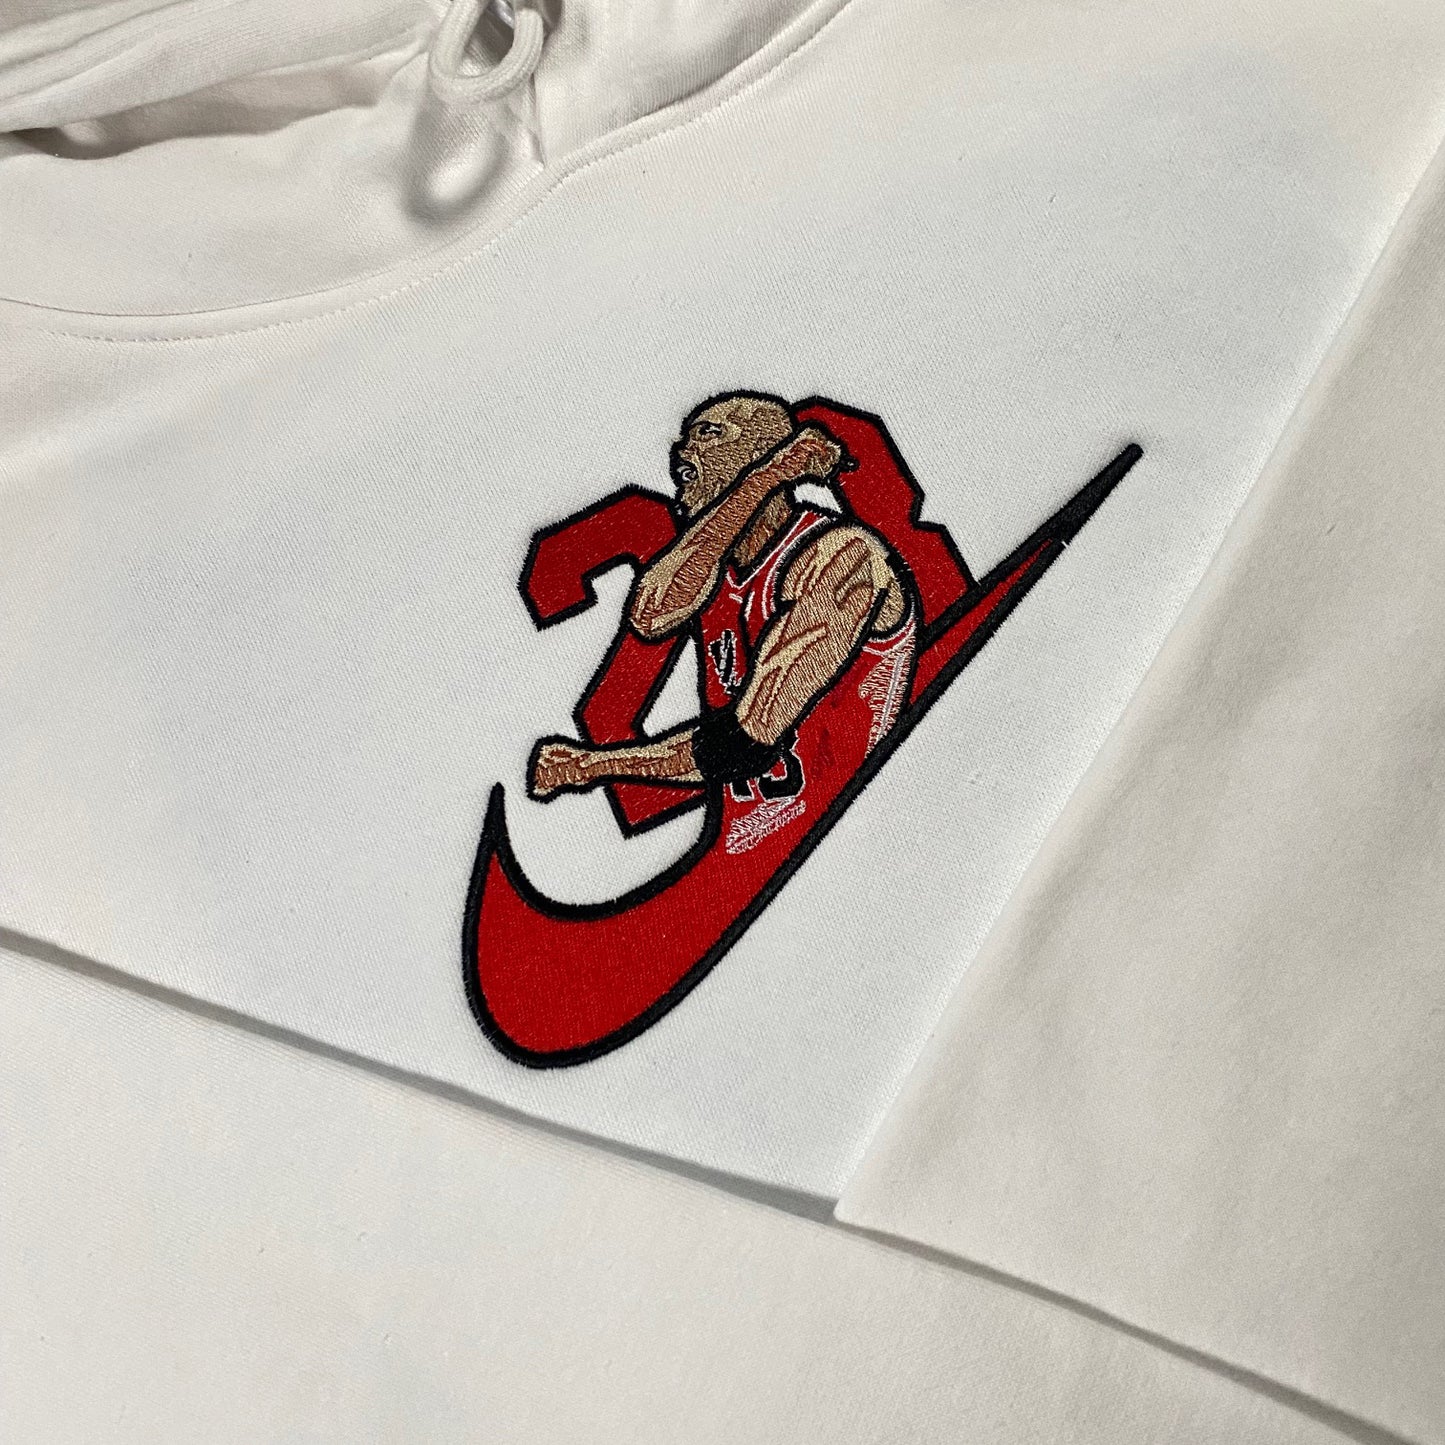 LIMITED Jumpman 23 EMBROIDERED ANIME HOODIE